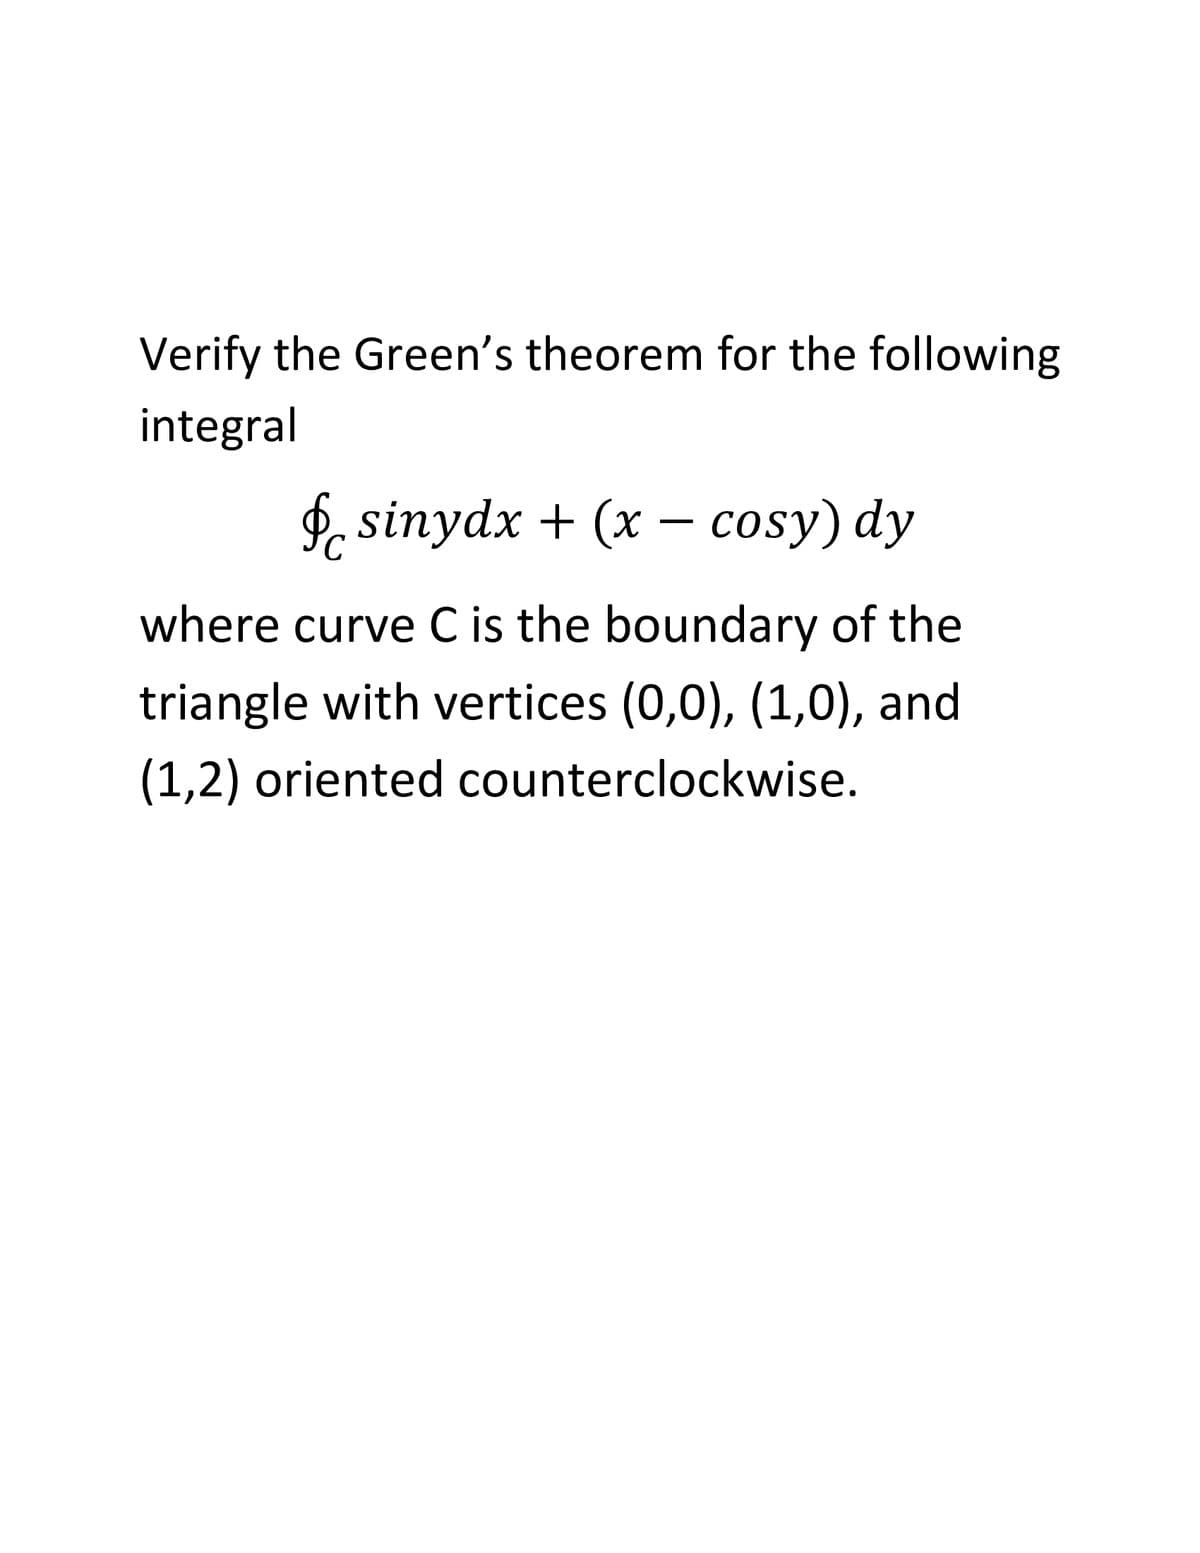 Verify the Green's theorem for the following
integral
f. sinydx + (x – cosy) dy
where curve C is the boundary of the
triangle with vertices (0,0), (1,0), and
(1,2) oriented counterclockwise.
